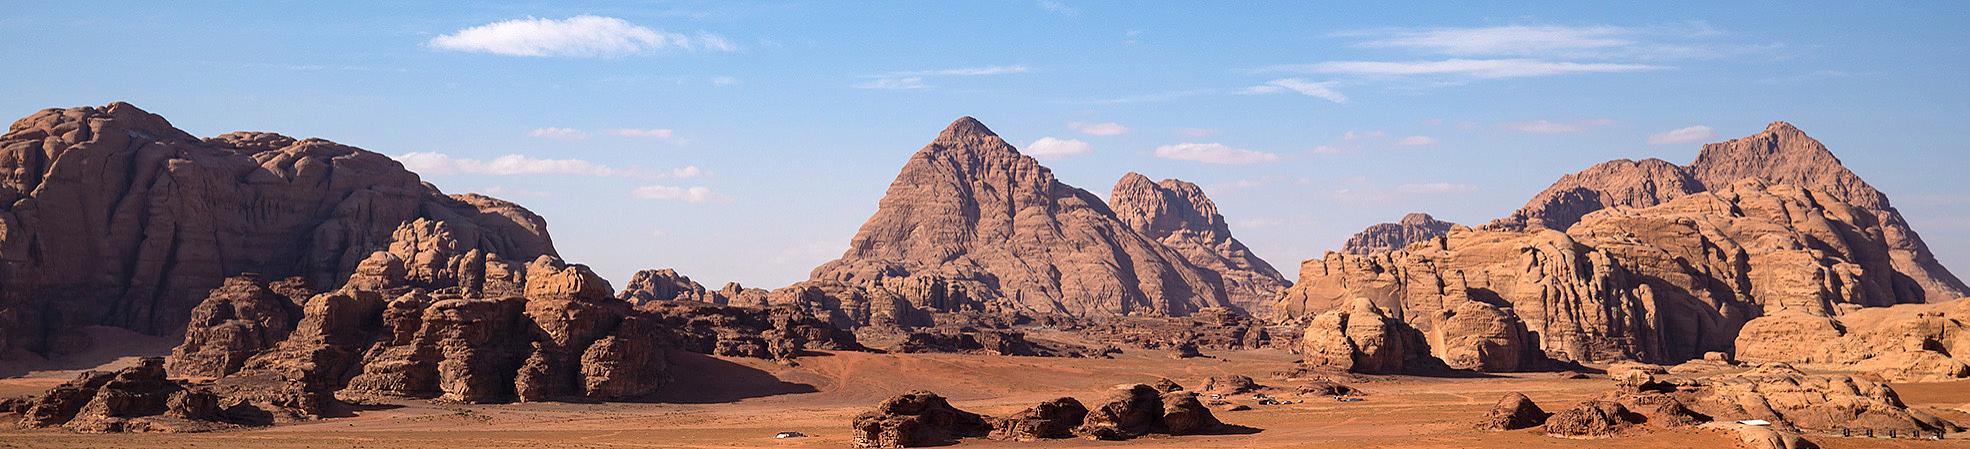 10 Interesting Facts About Wadi Rum That Will Surprise You